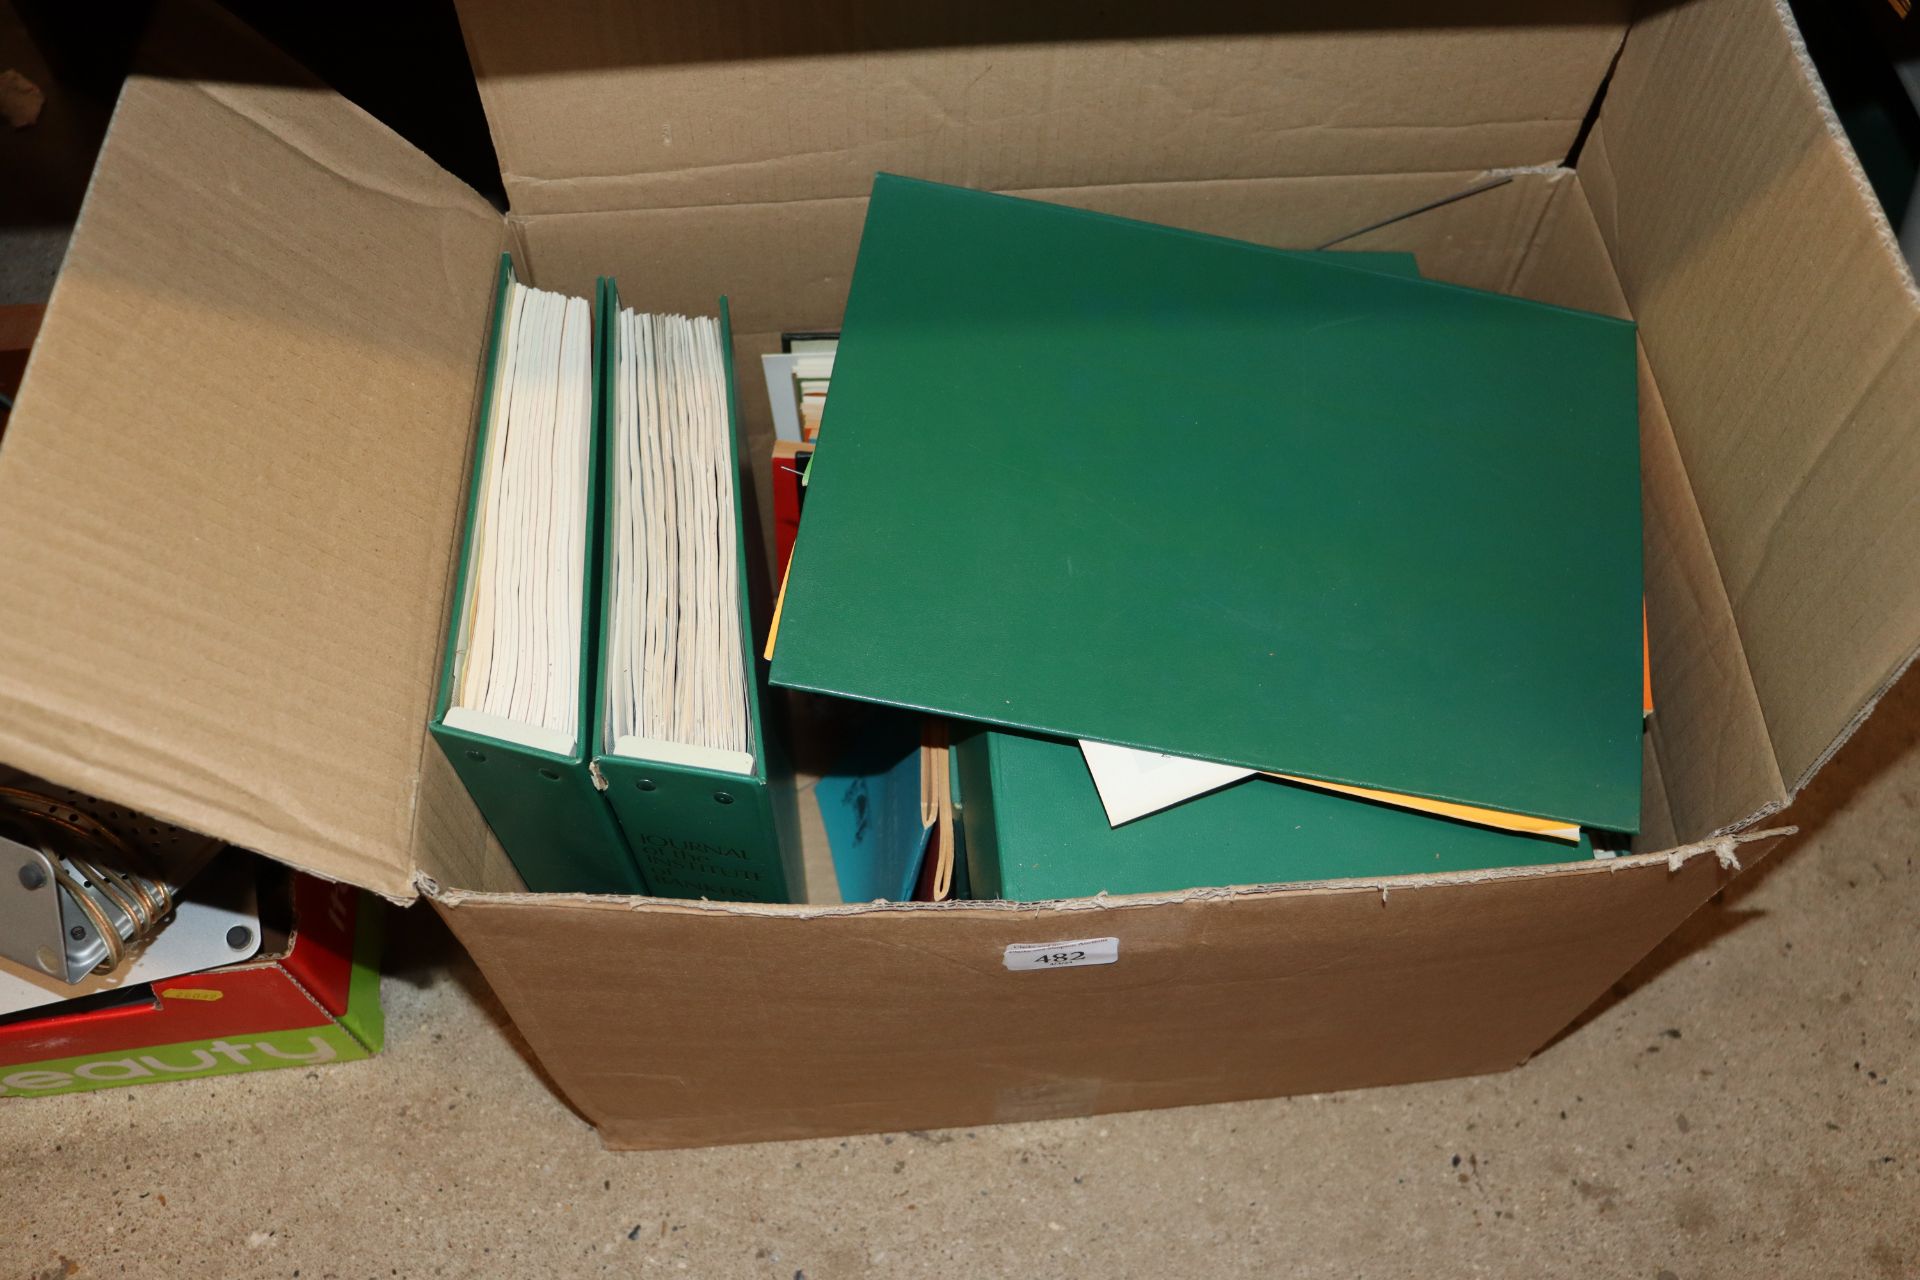 A box containing The Journal of The Institute of B